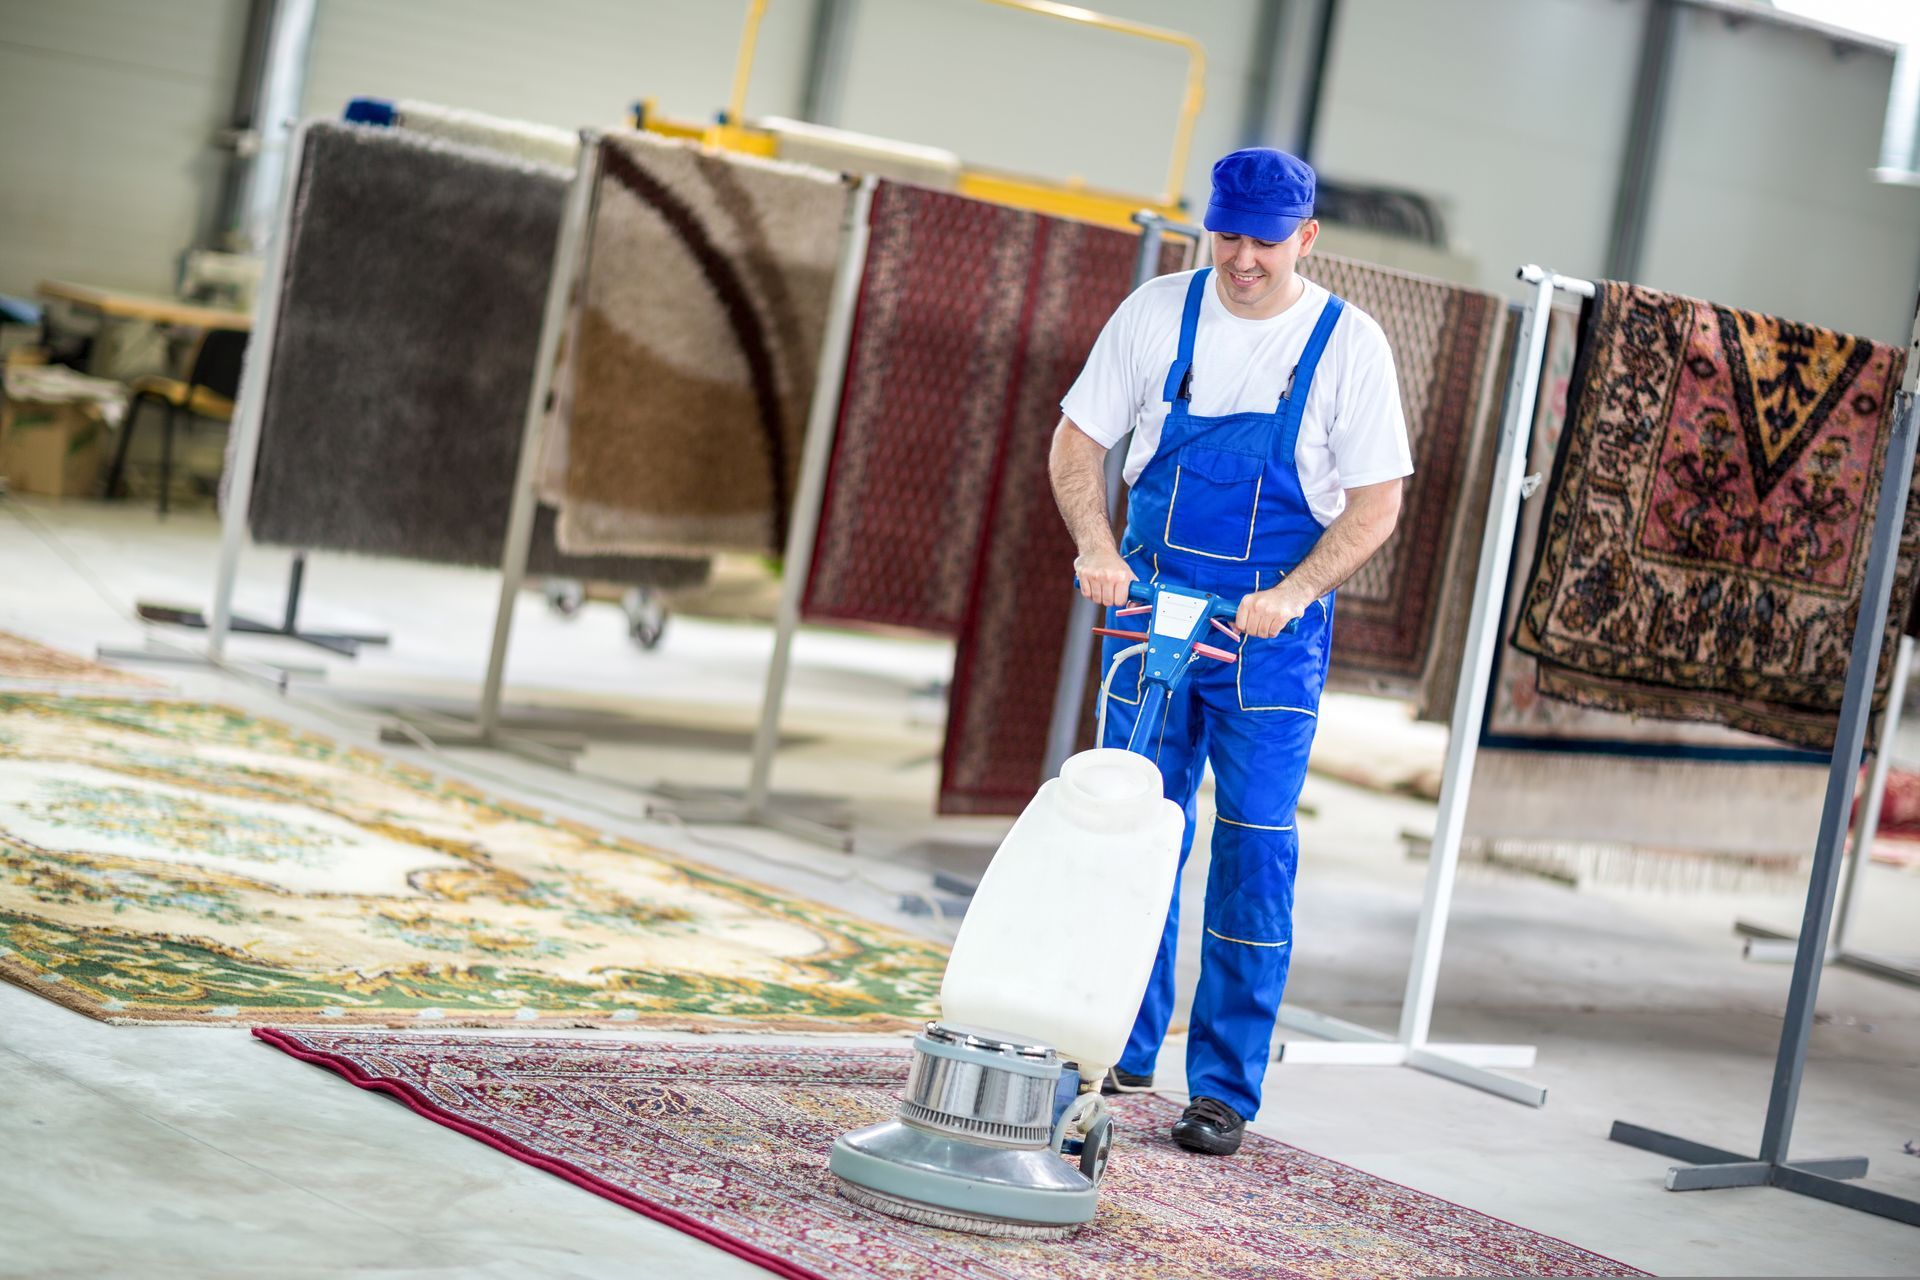 a man in blue overalls is using a machine to clean a rug